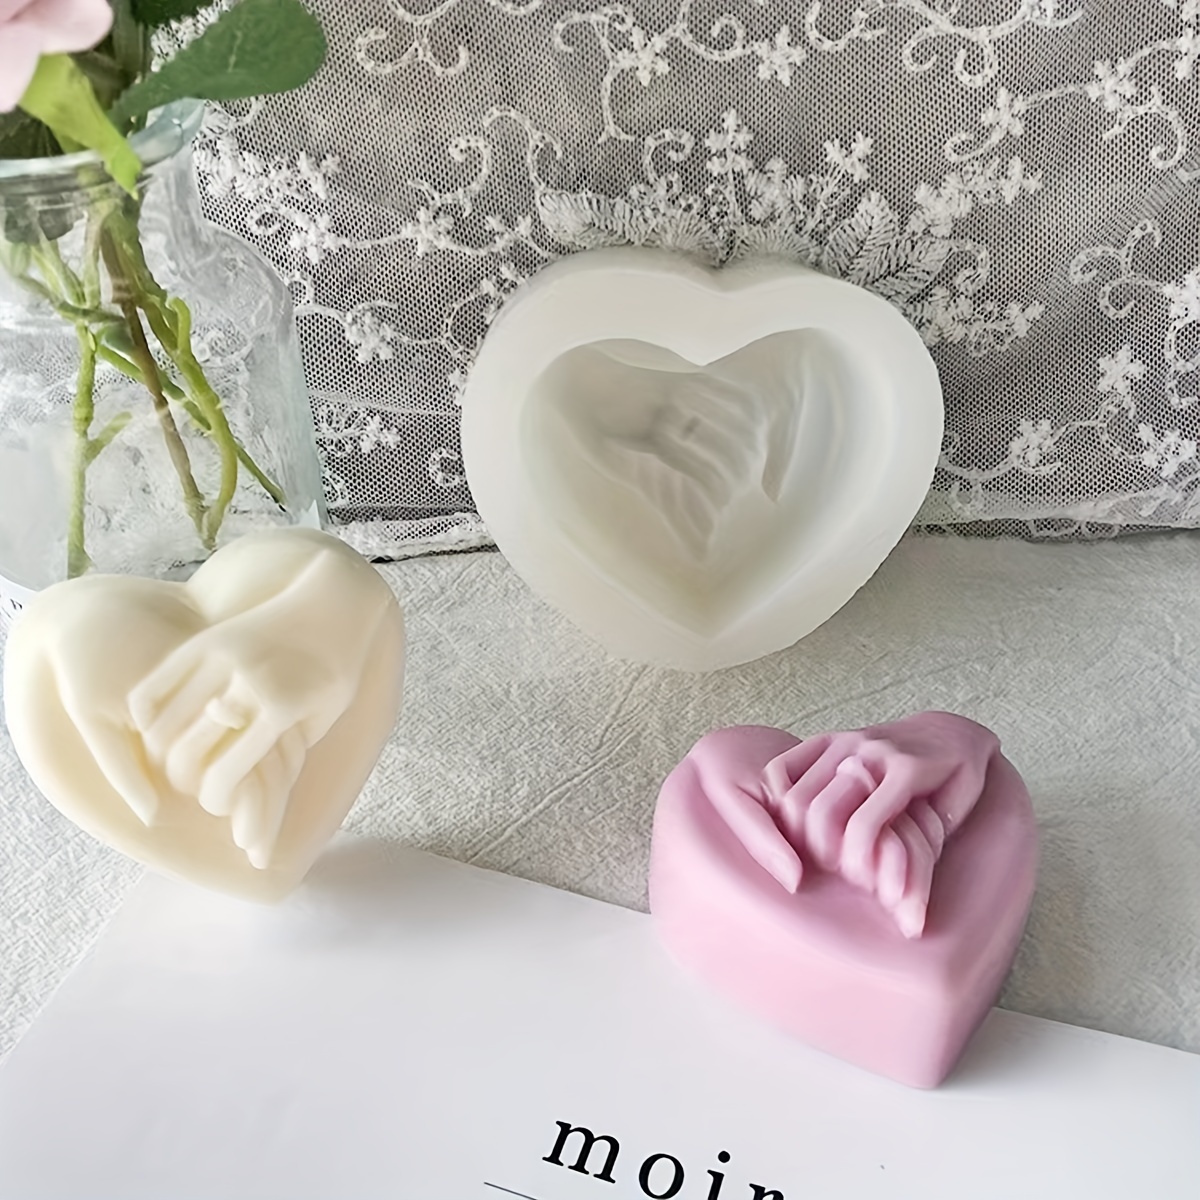 Holding Heart Candle Mold Hand Silicone Mold DIY Valentine's Day